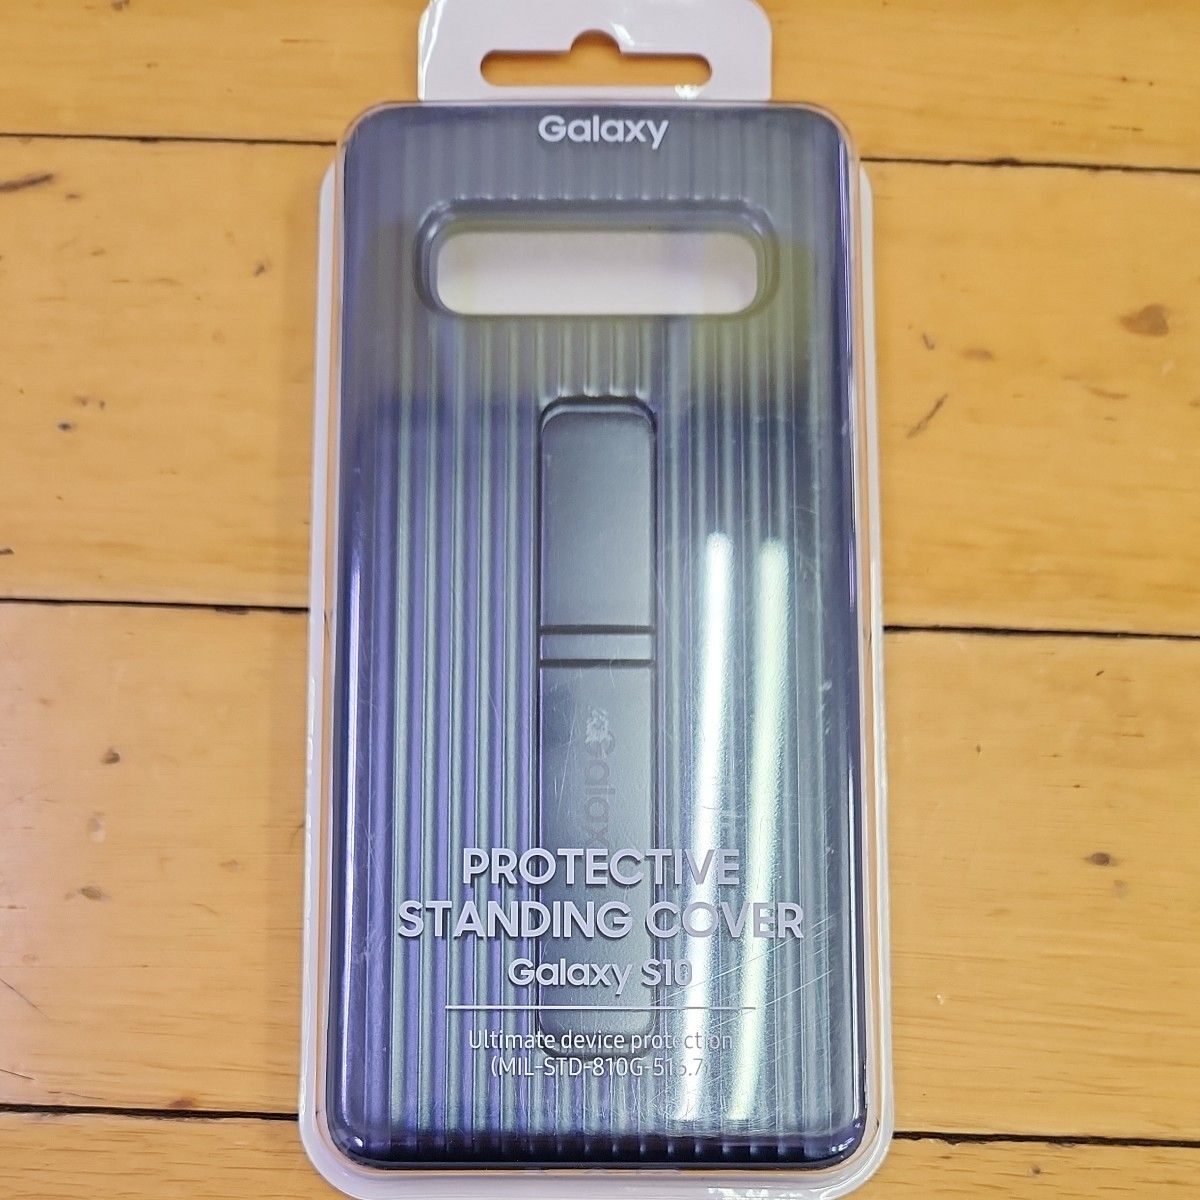 Galaxy S10 PROTECTIVE STANDING COVER